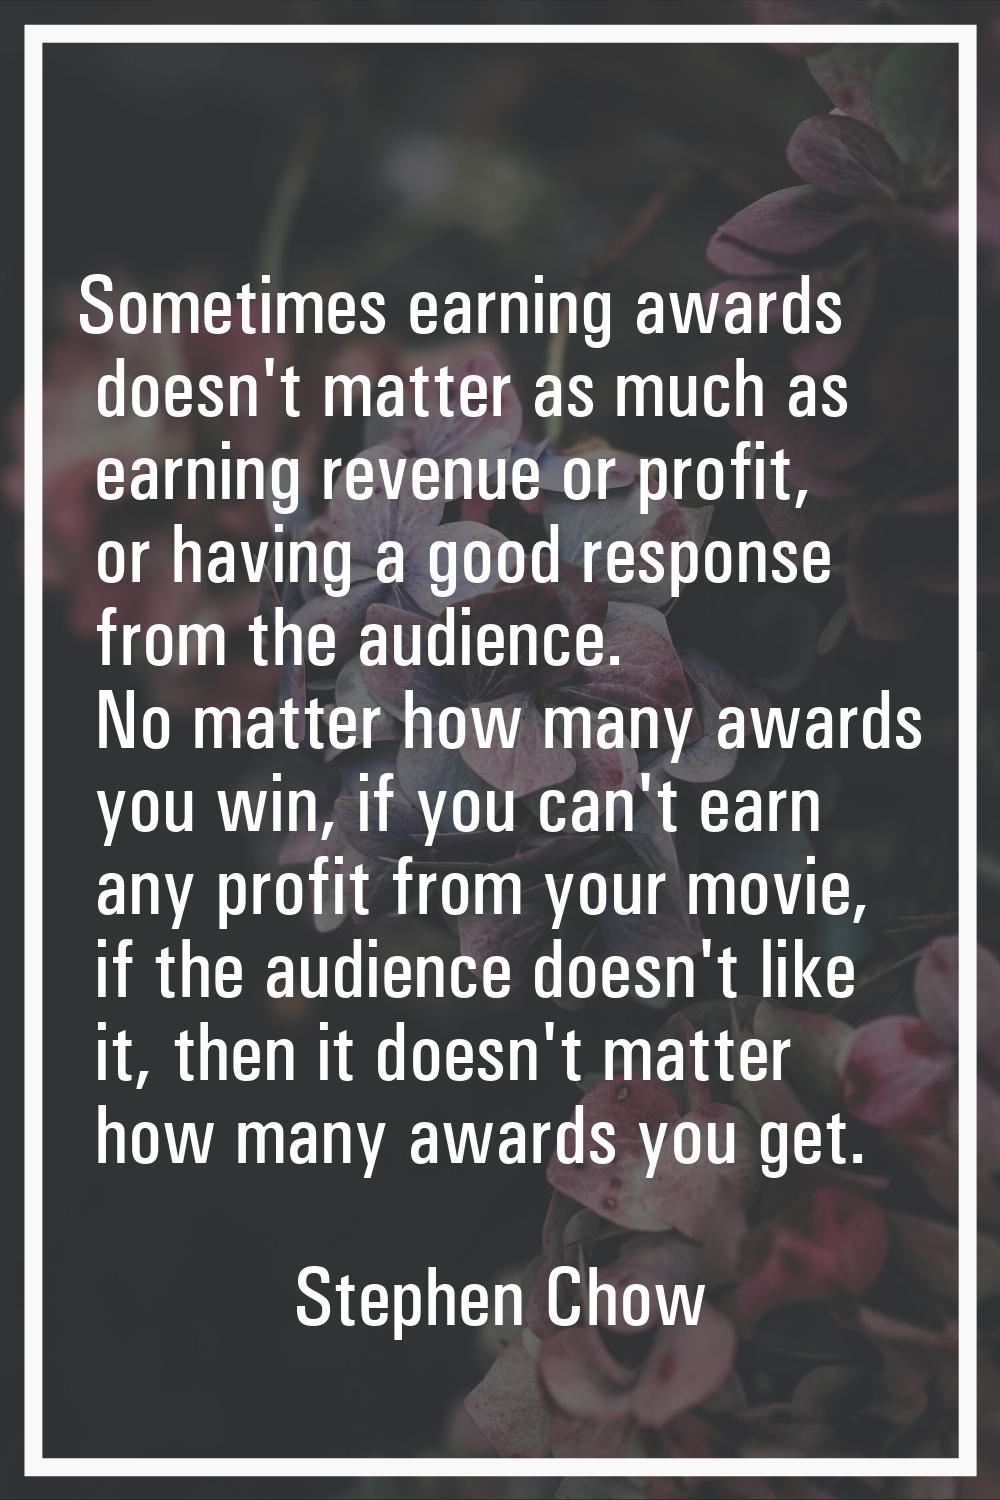 Sometimes earning awards doesn't matter as much as earning revenue or profit, or having a good resp